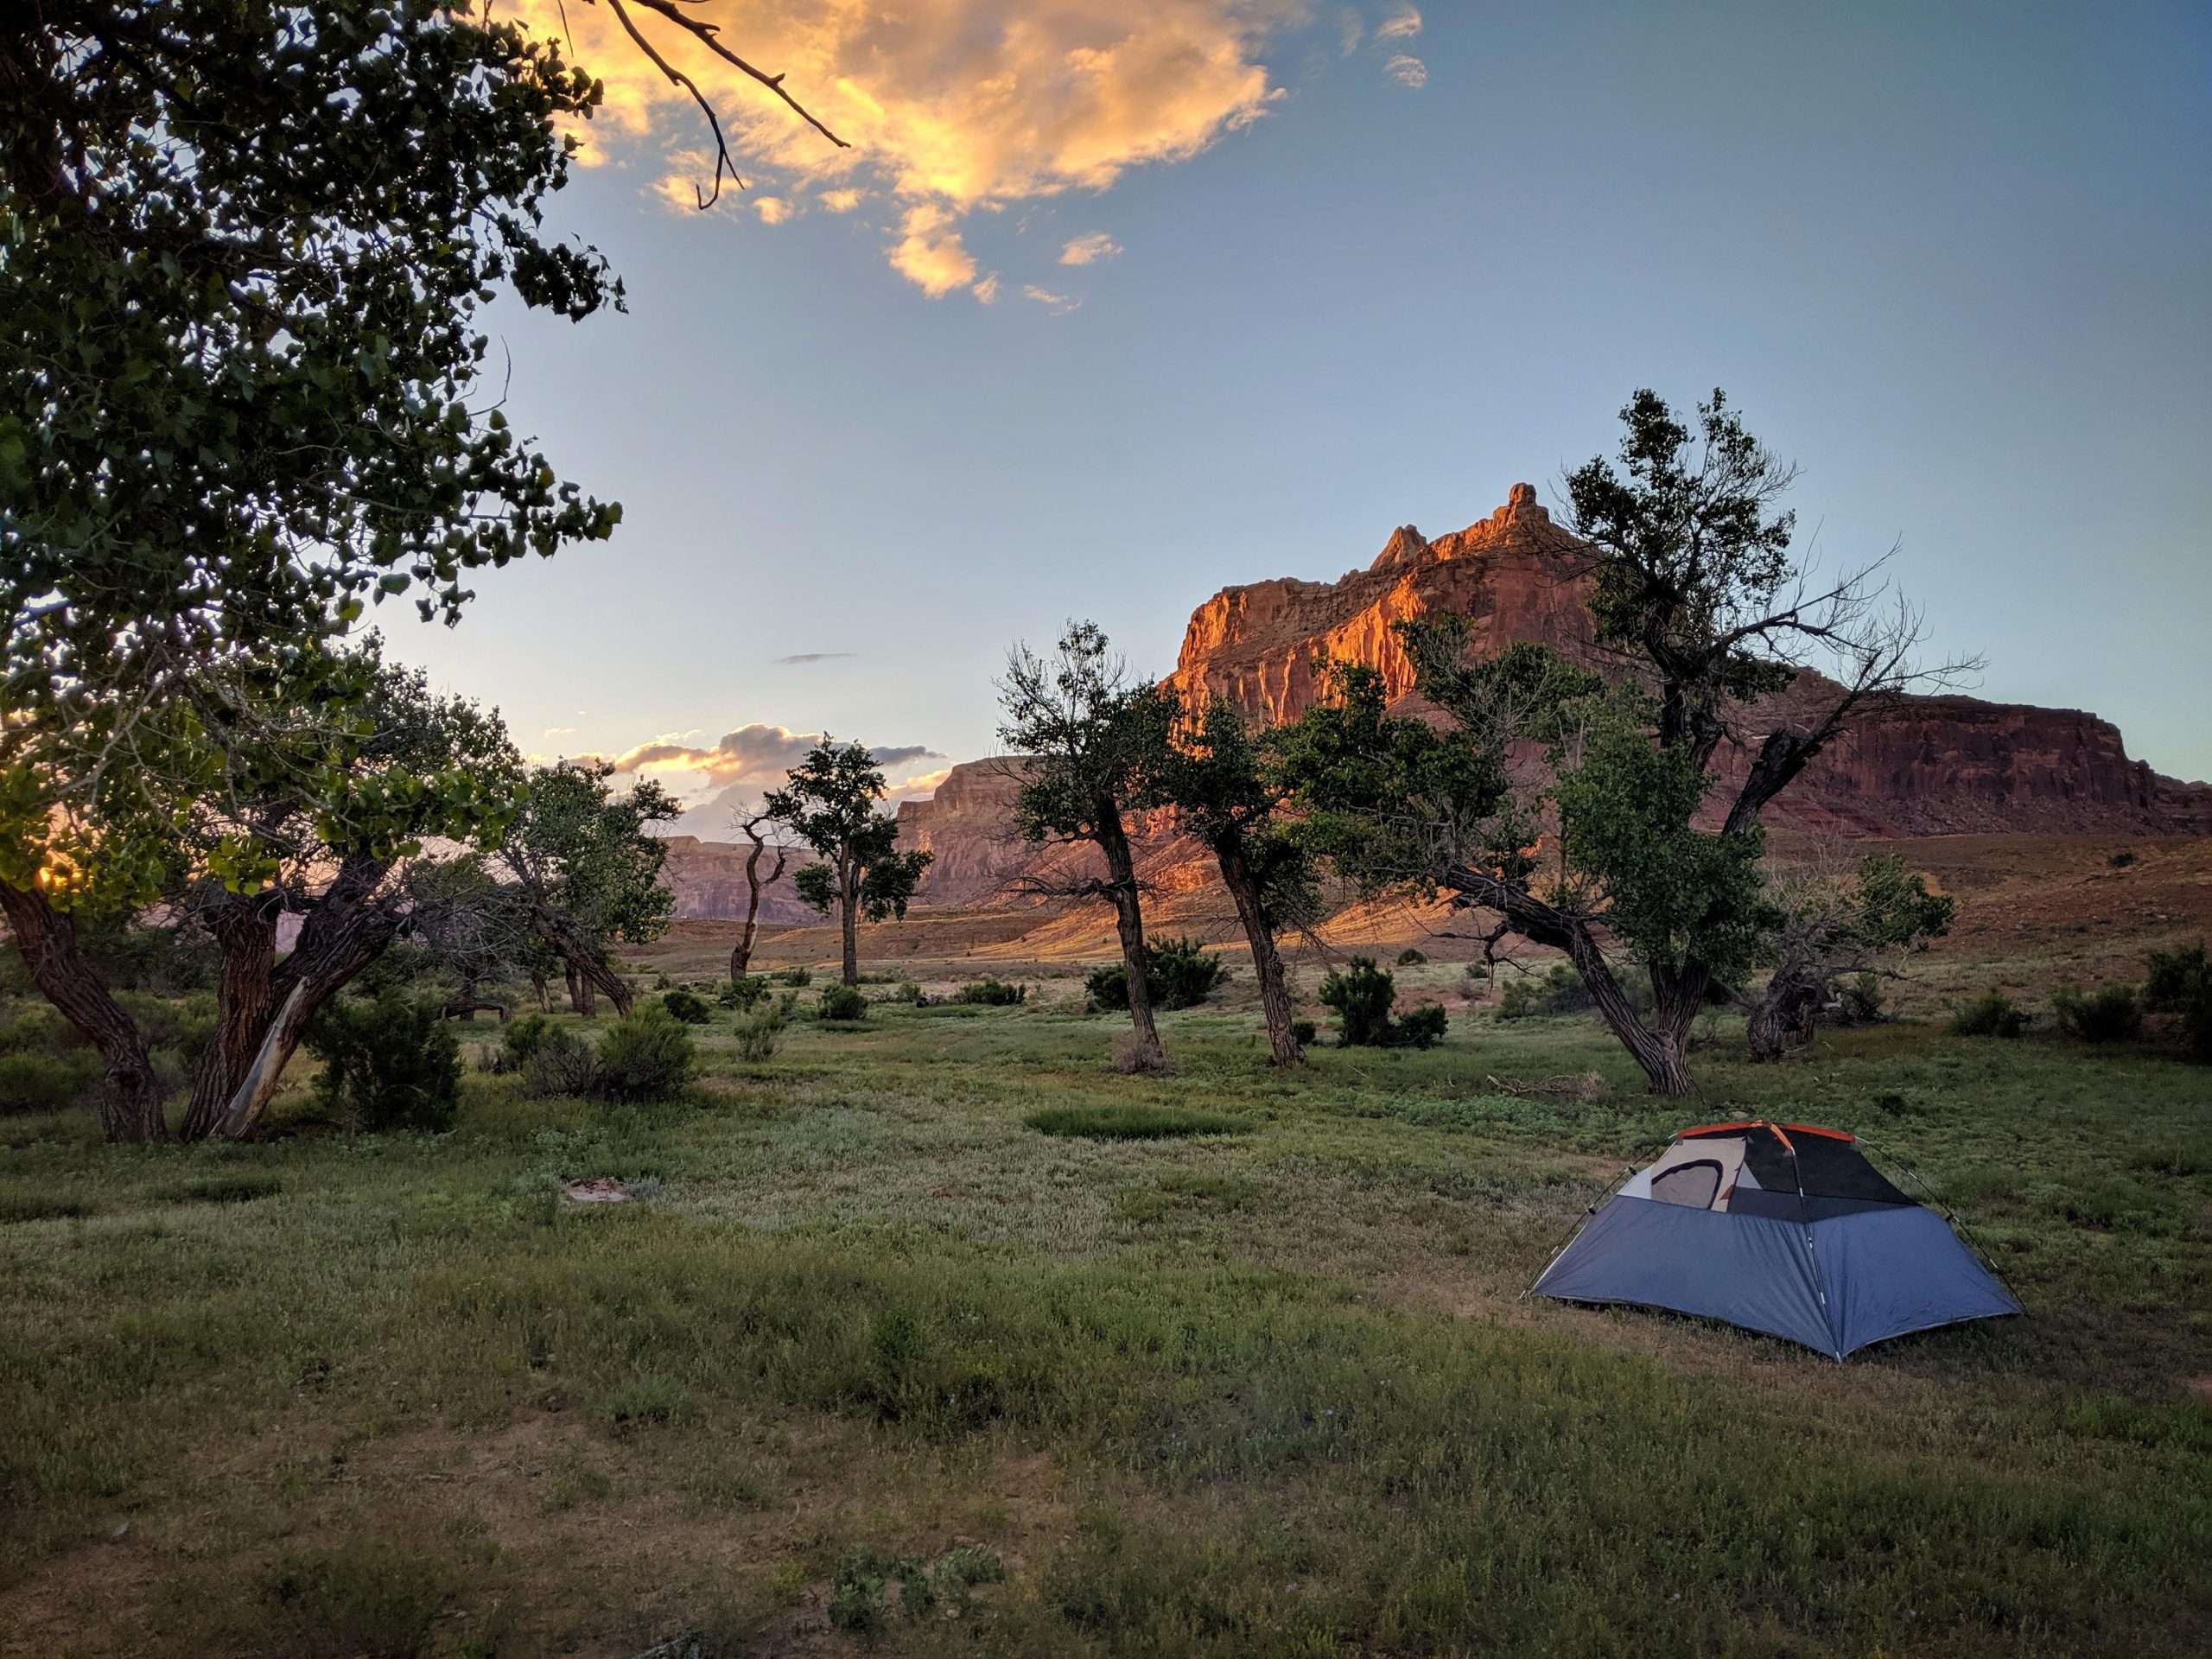 Camped here for a weekend in Southern Utah. I love living ...